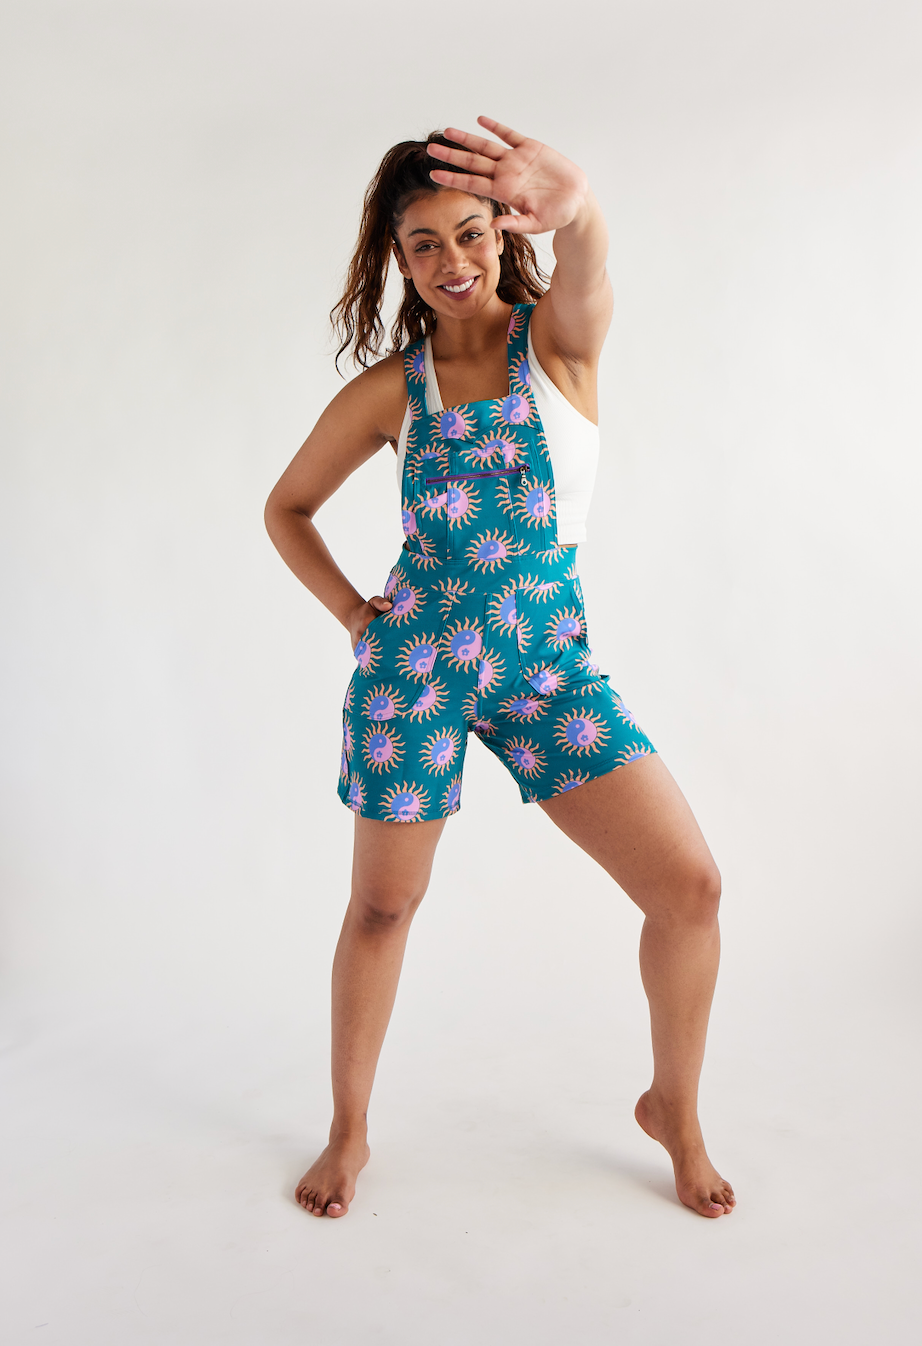 Overall Shorts Romper - Tropical Yin Yang